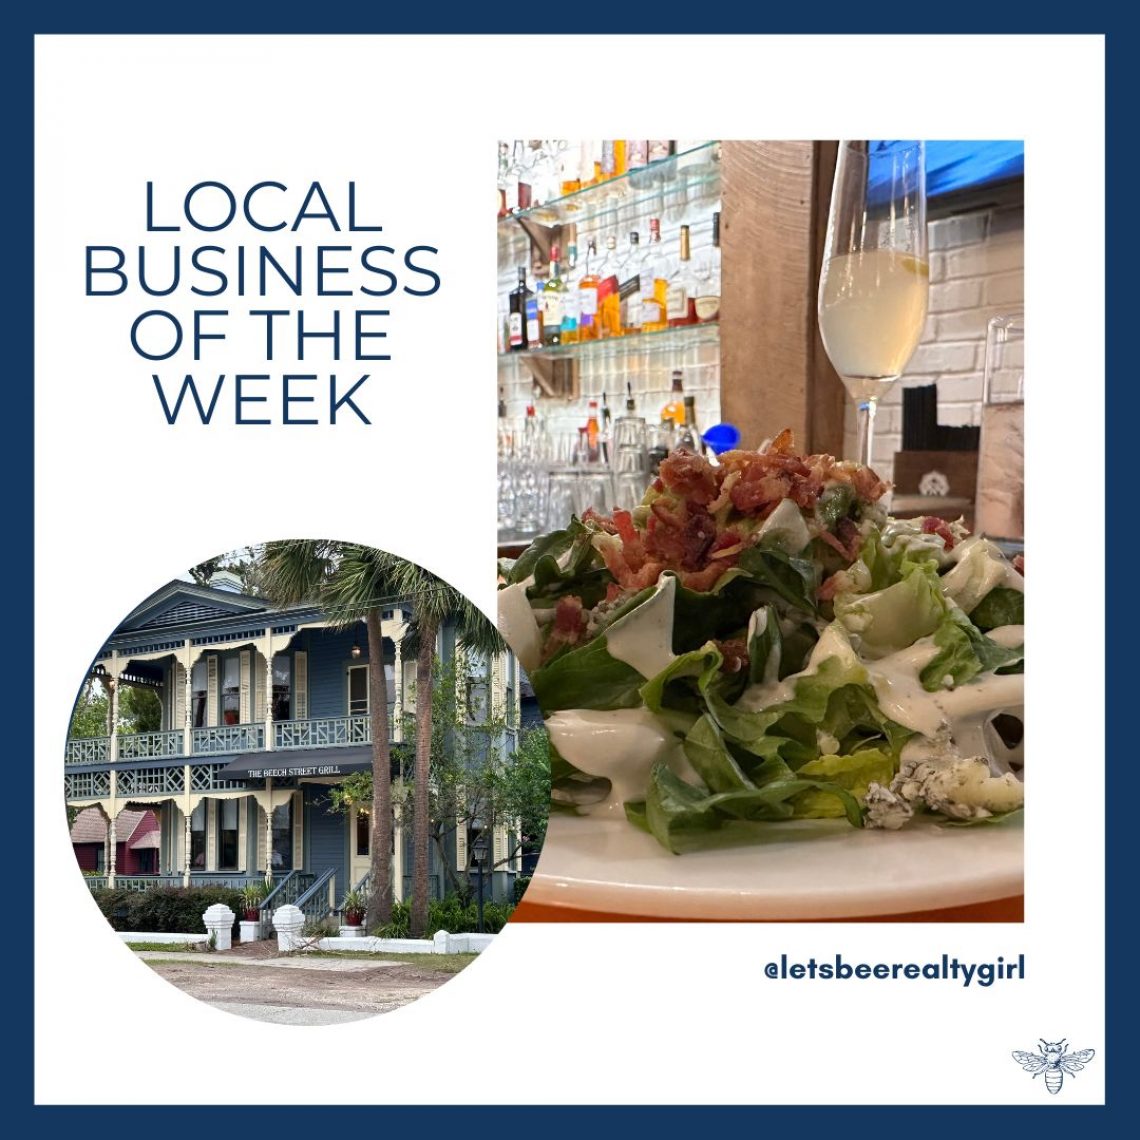 The Beech street grill - local restaurant of the week